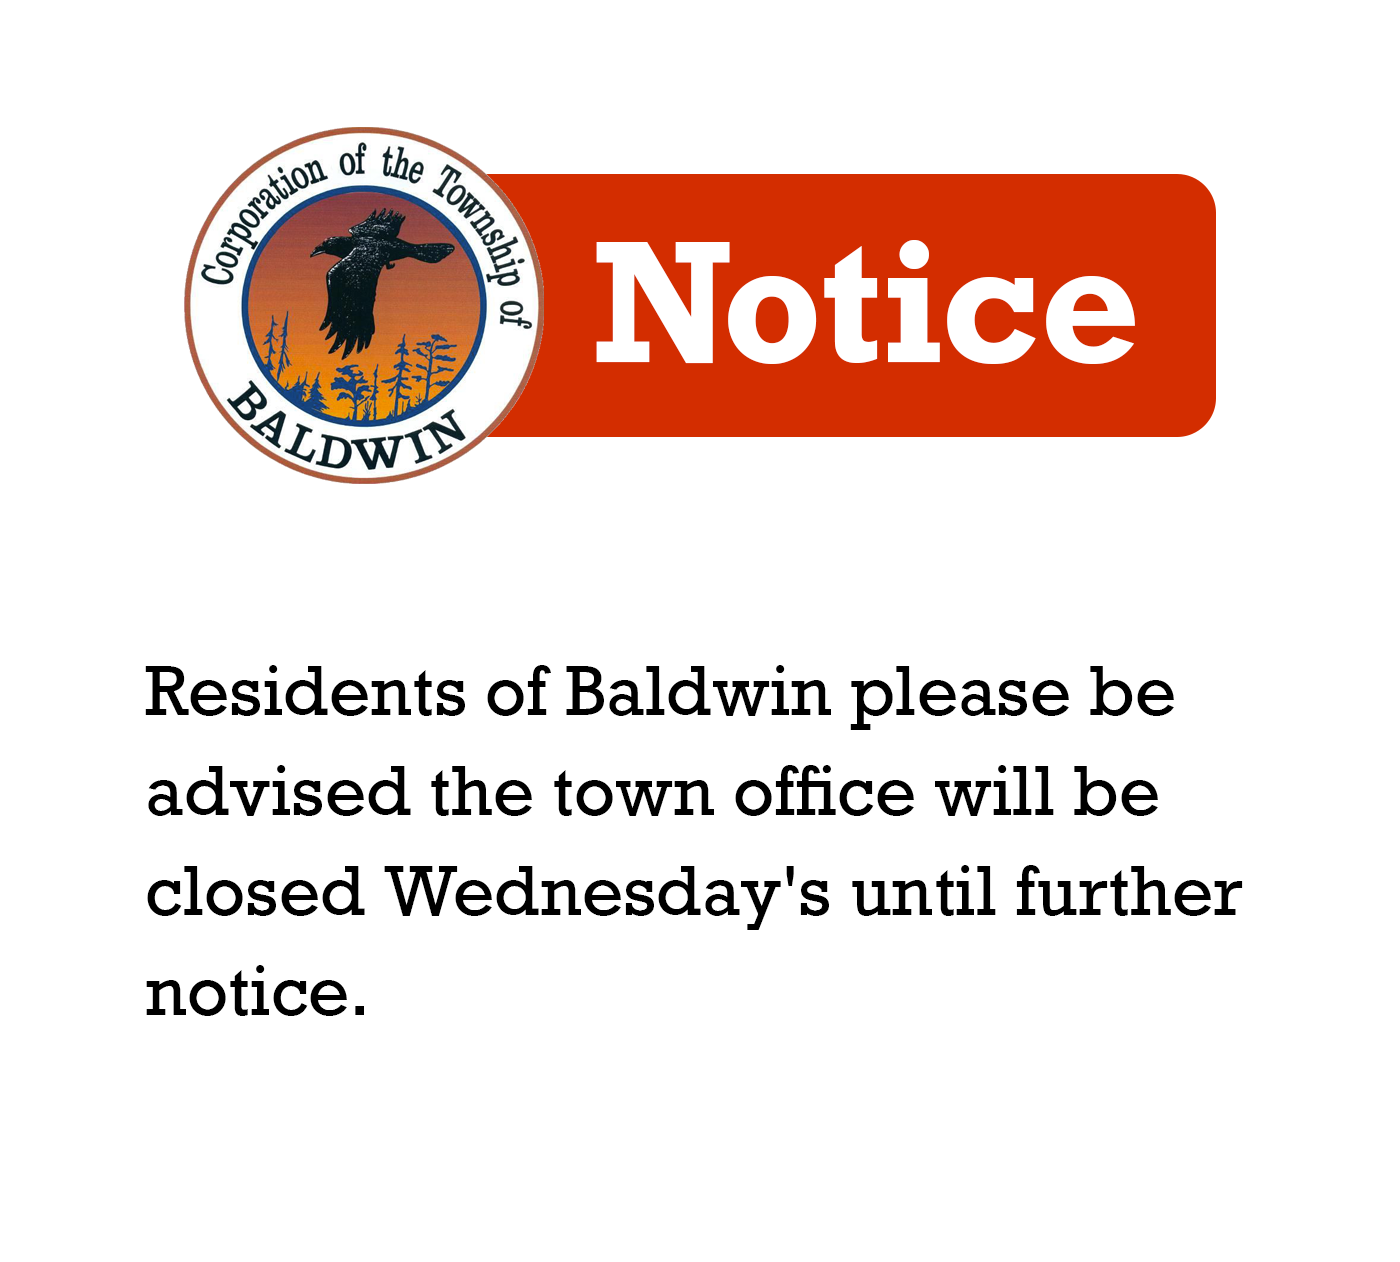 Residents of Baldwin please be advised the town office will be closed Wednesday's until further notice.